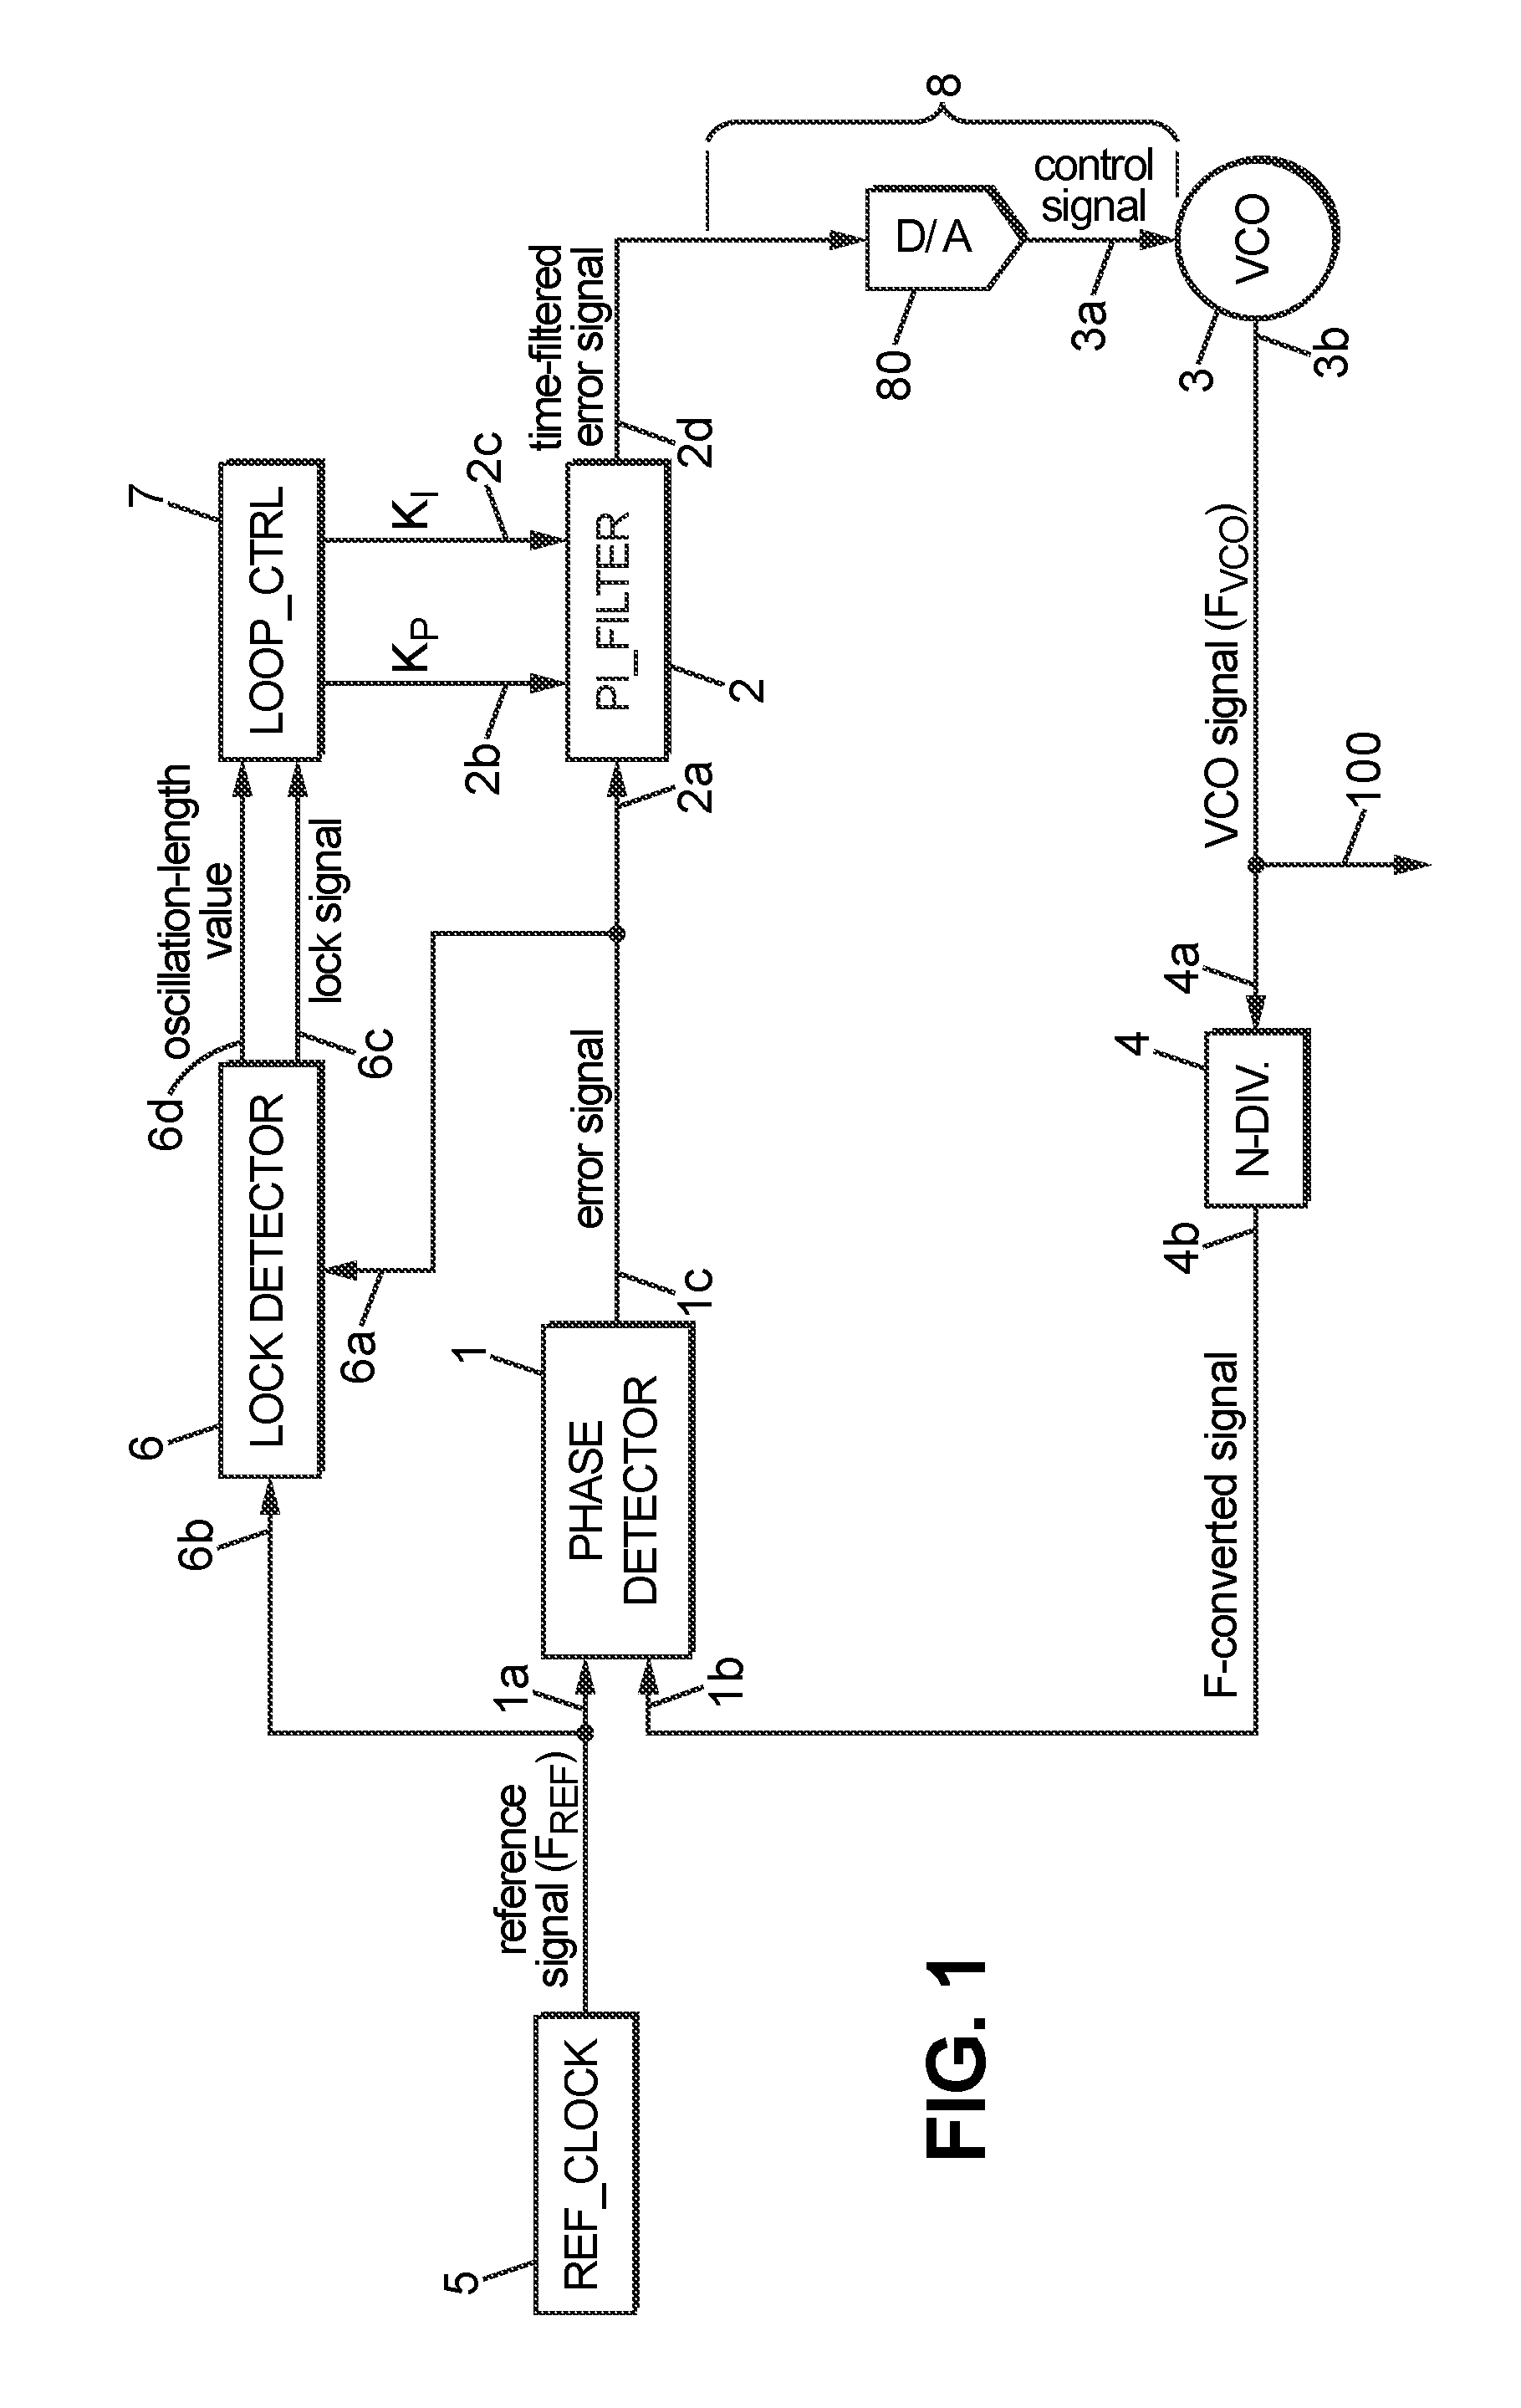 Phase-locked loop device with managed transition to random noise operation mode